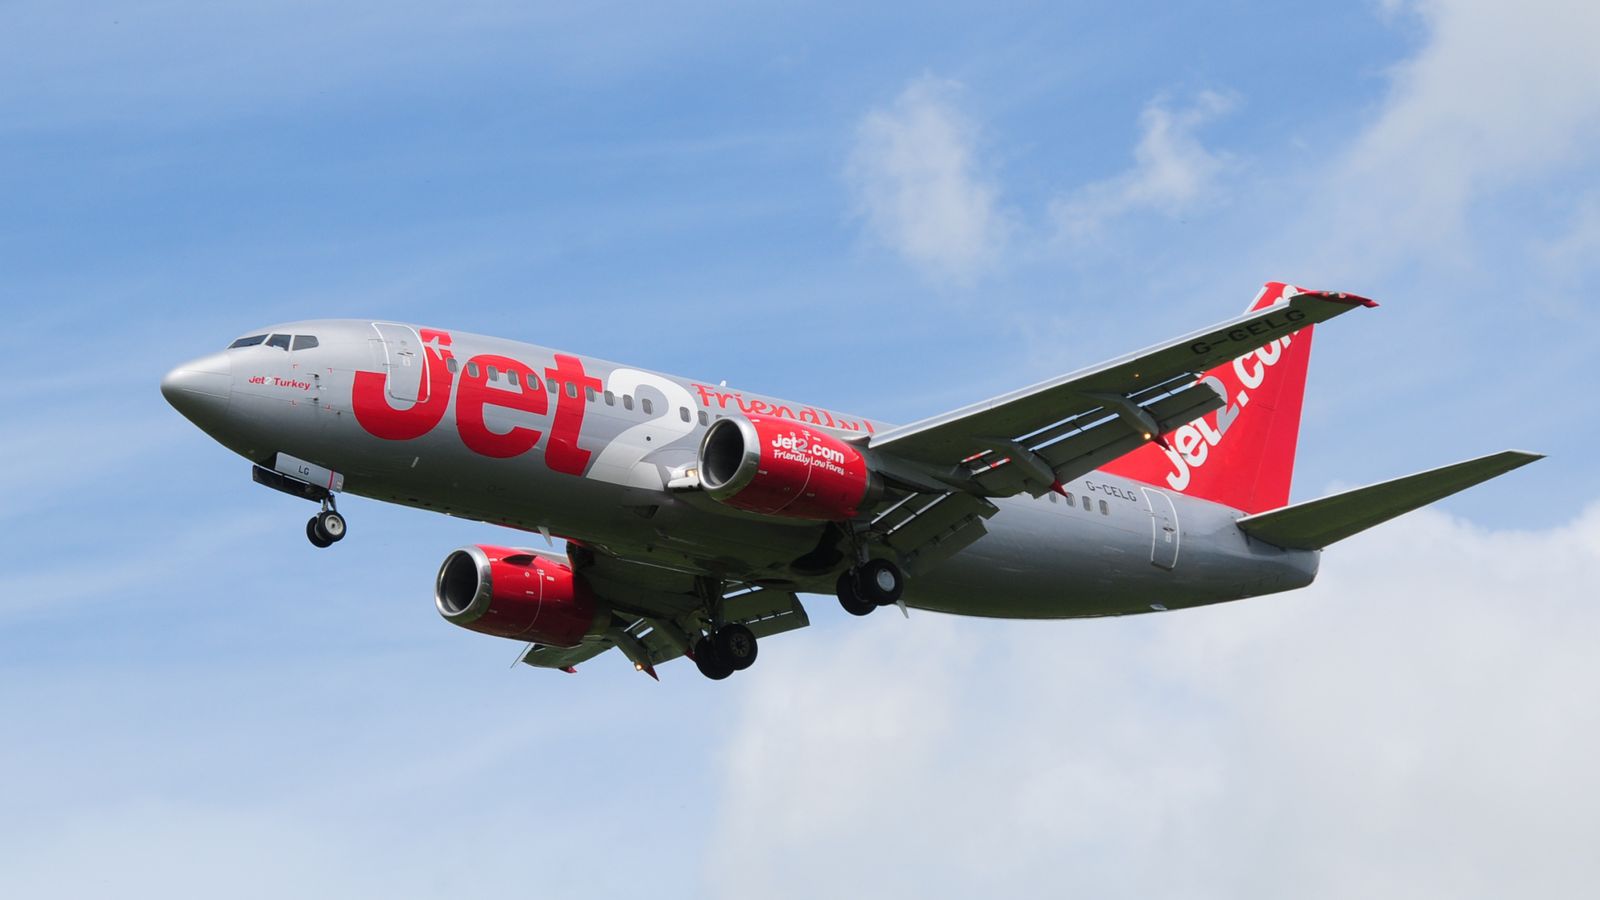 Airports slammed as 'woefully ill-prepared' by Jet2 boss as travel chaos deemed 'inexcusable'